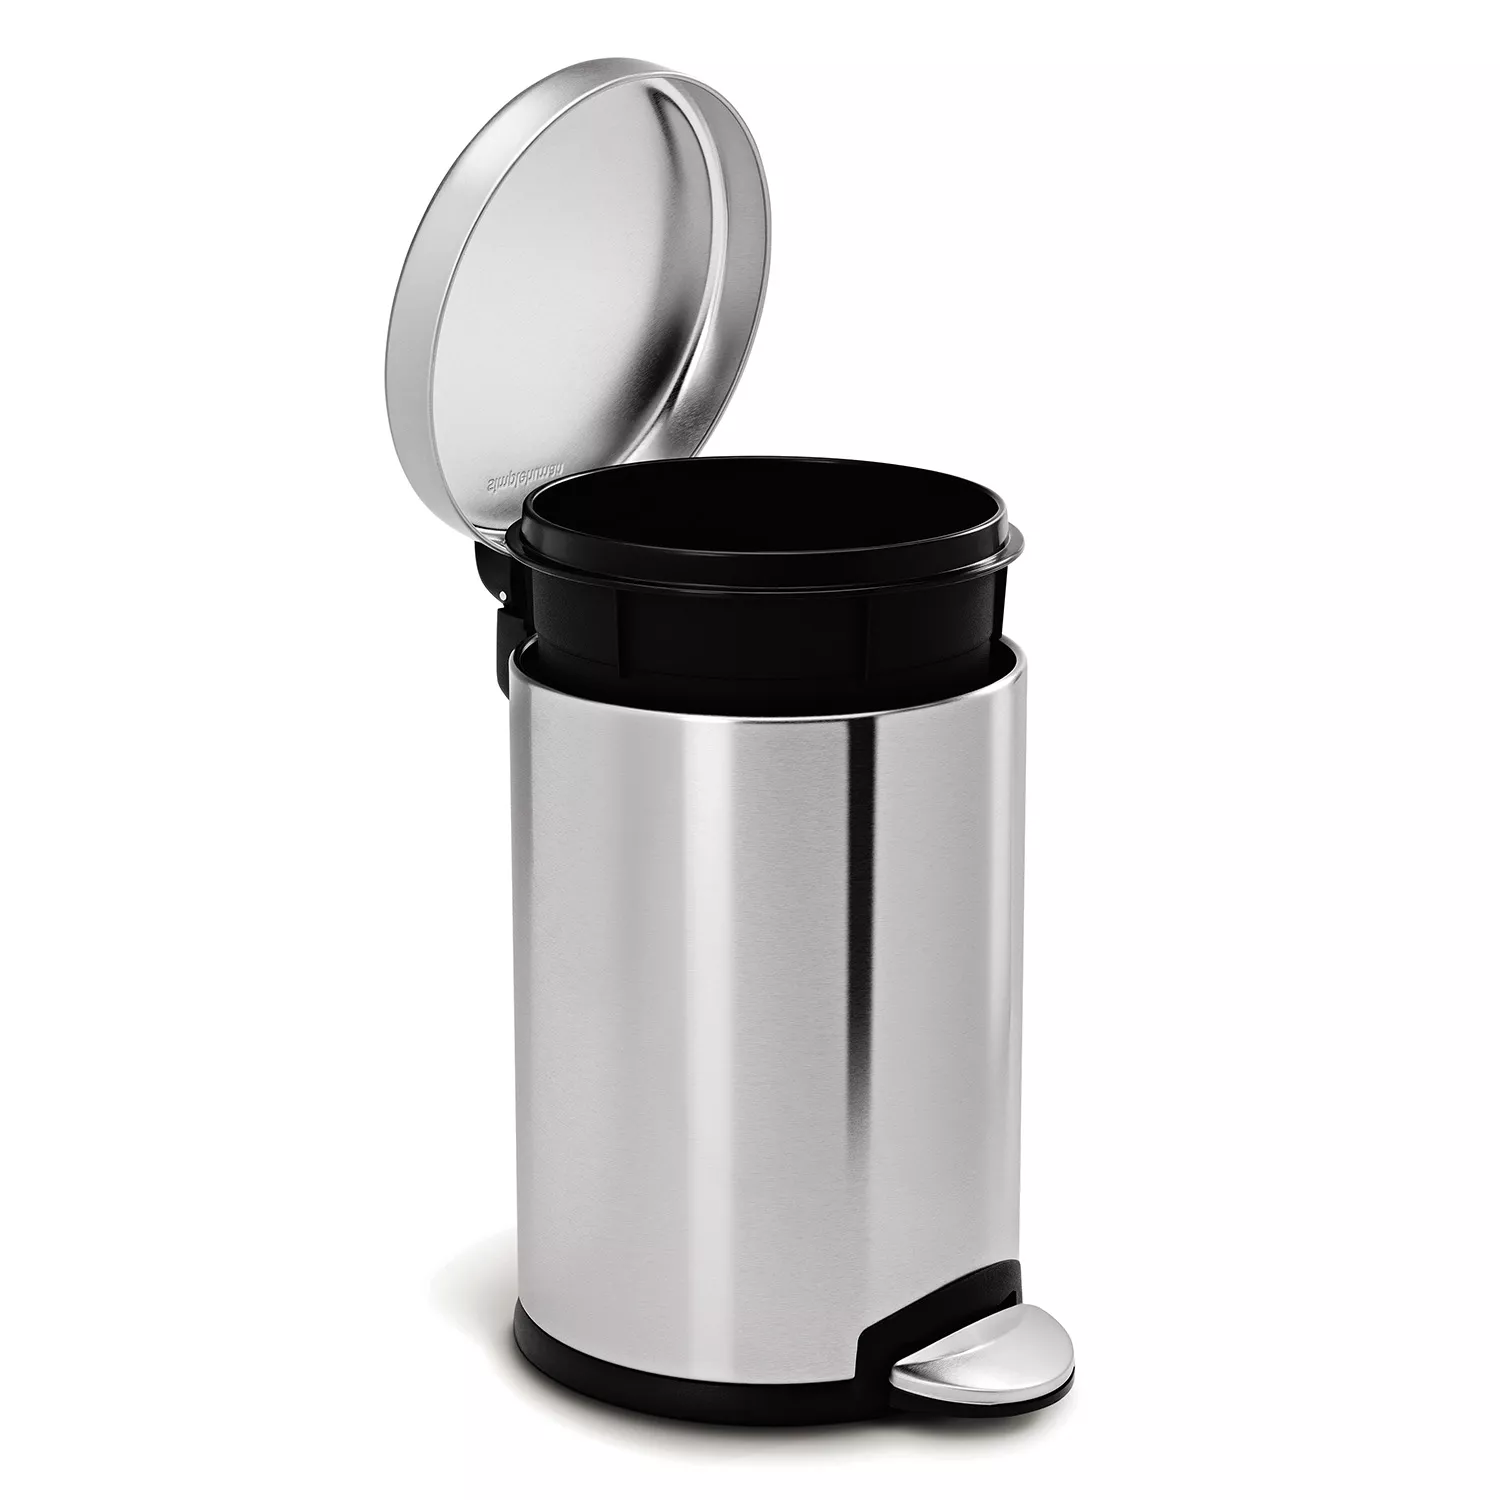 simplehuman 30 Liter / 8 Gallon Round Step Trash Can, Brushed Stainless  Steel & Reviews